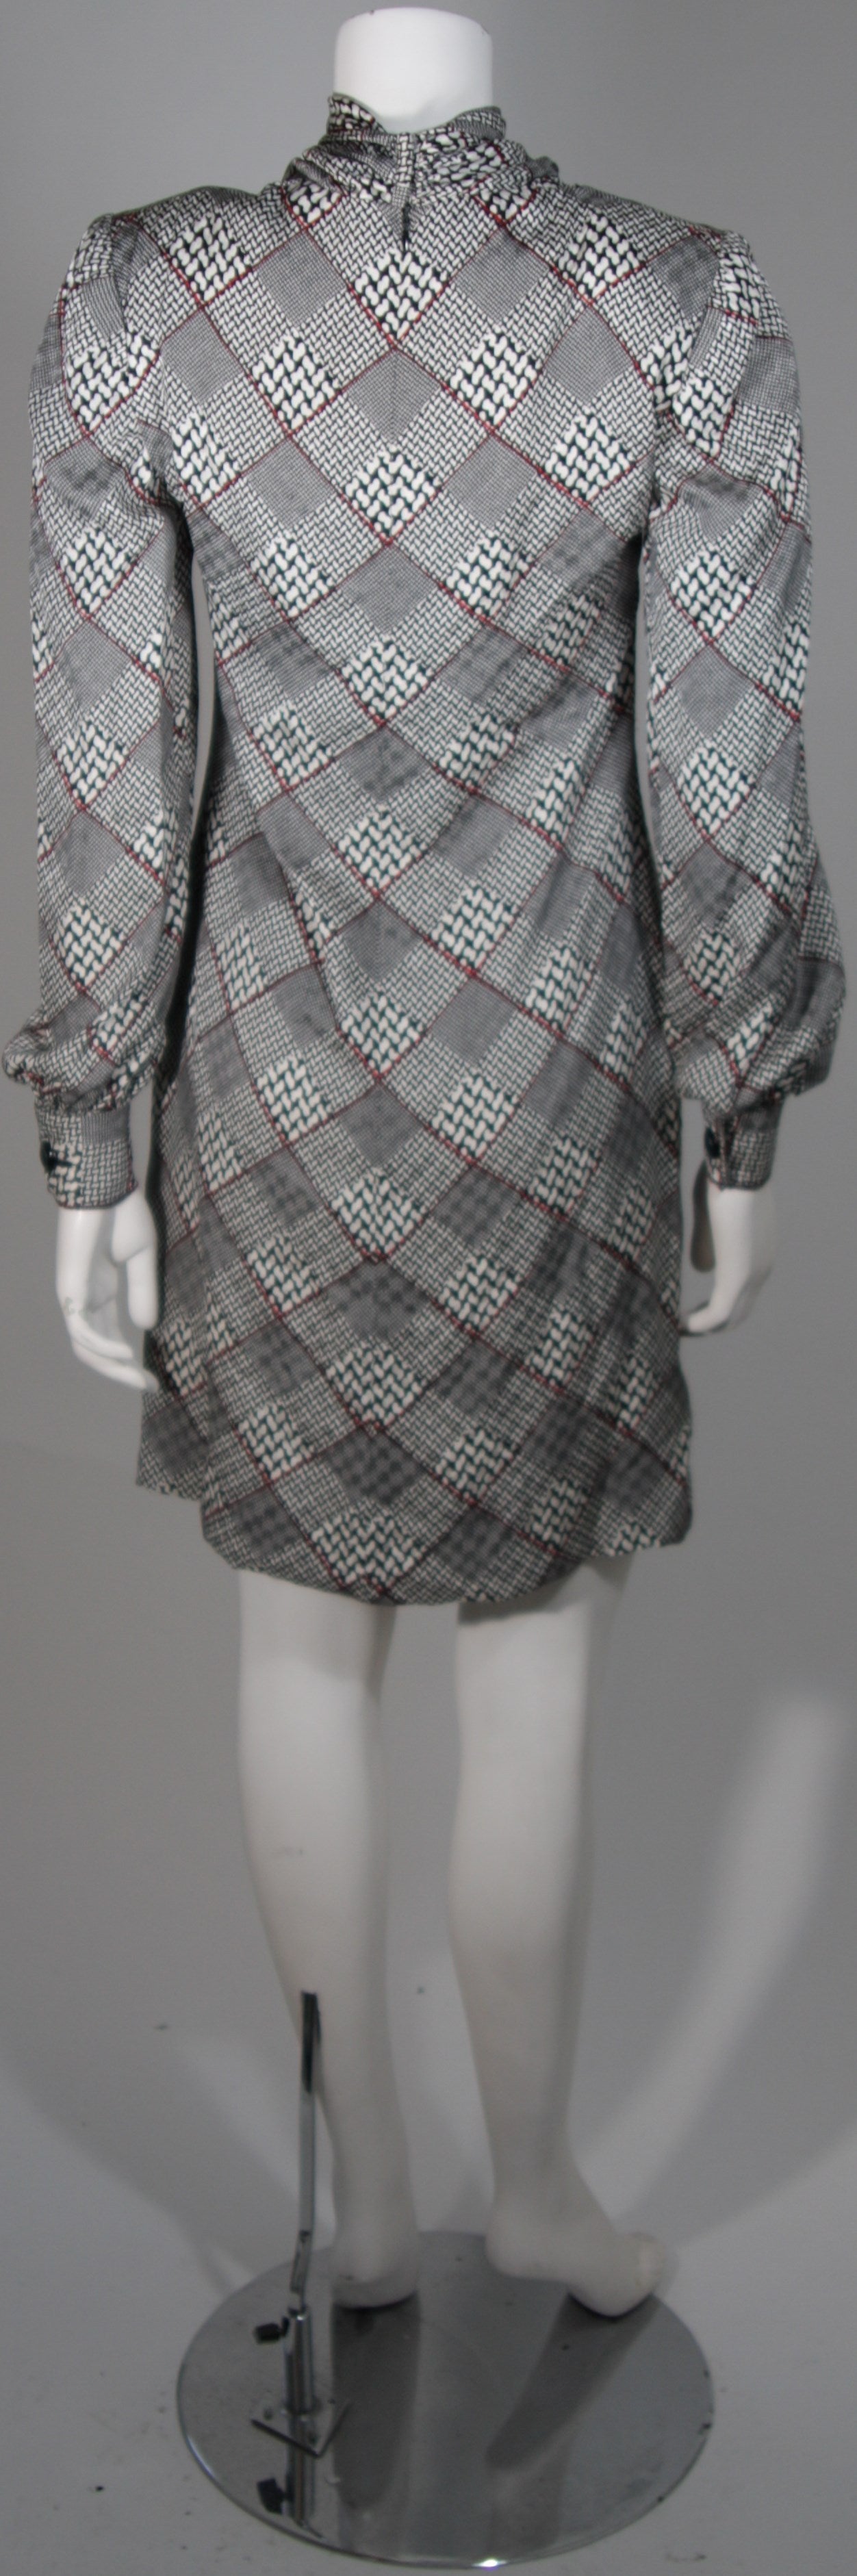 Galanos Couture Houndstooth Dress and Coat Ensemble Size 2 4 6 3